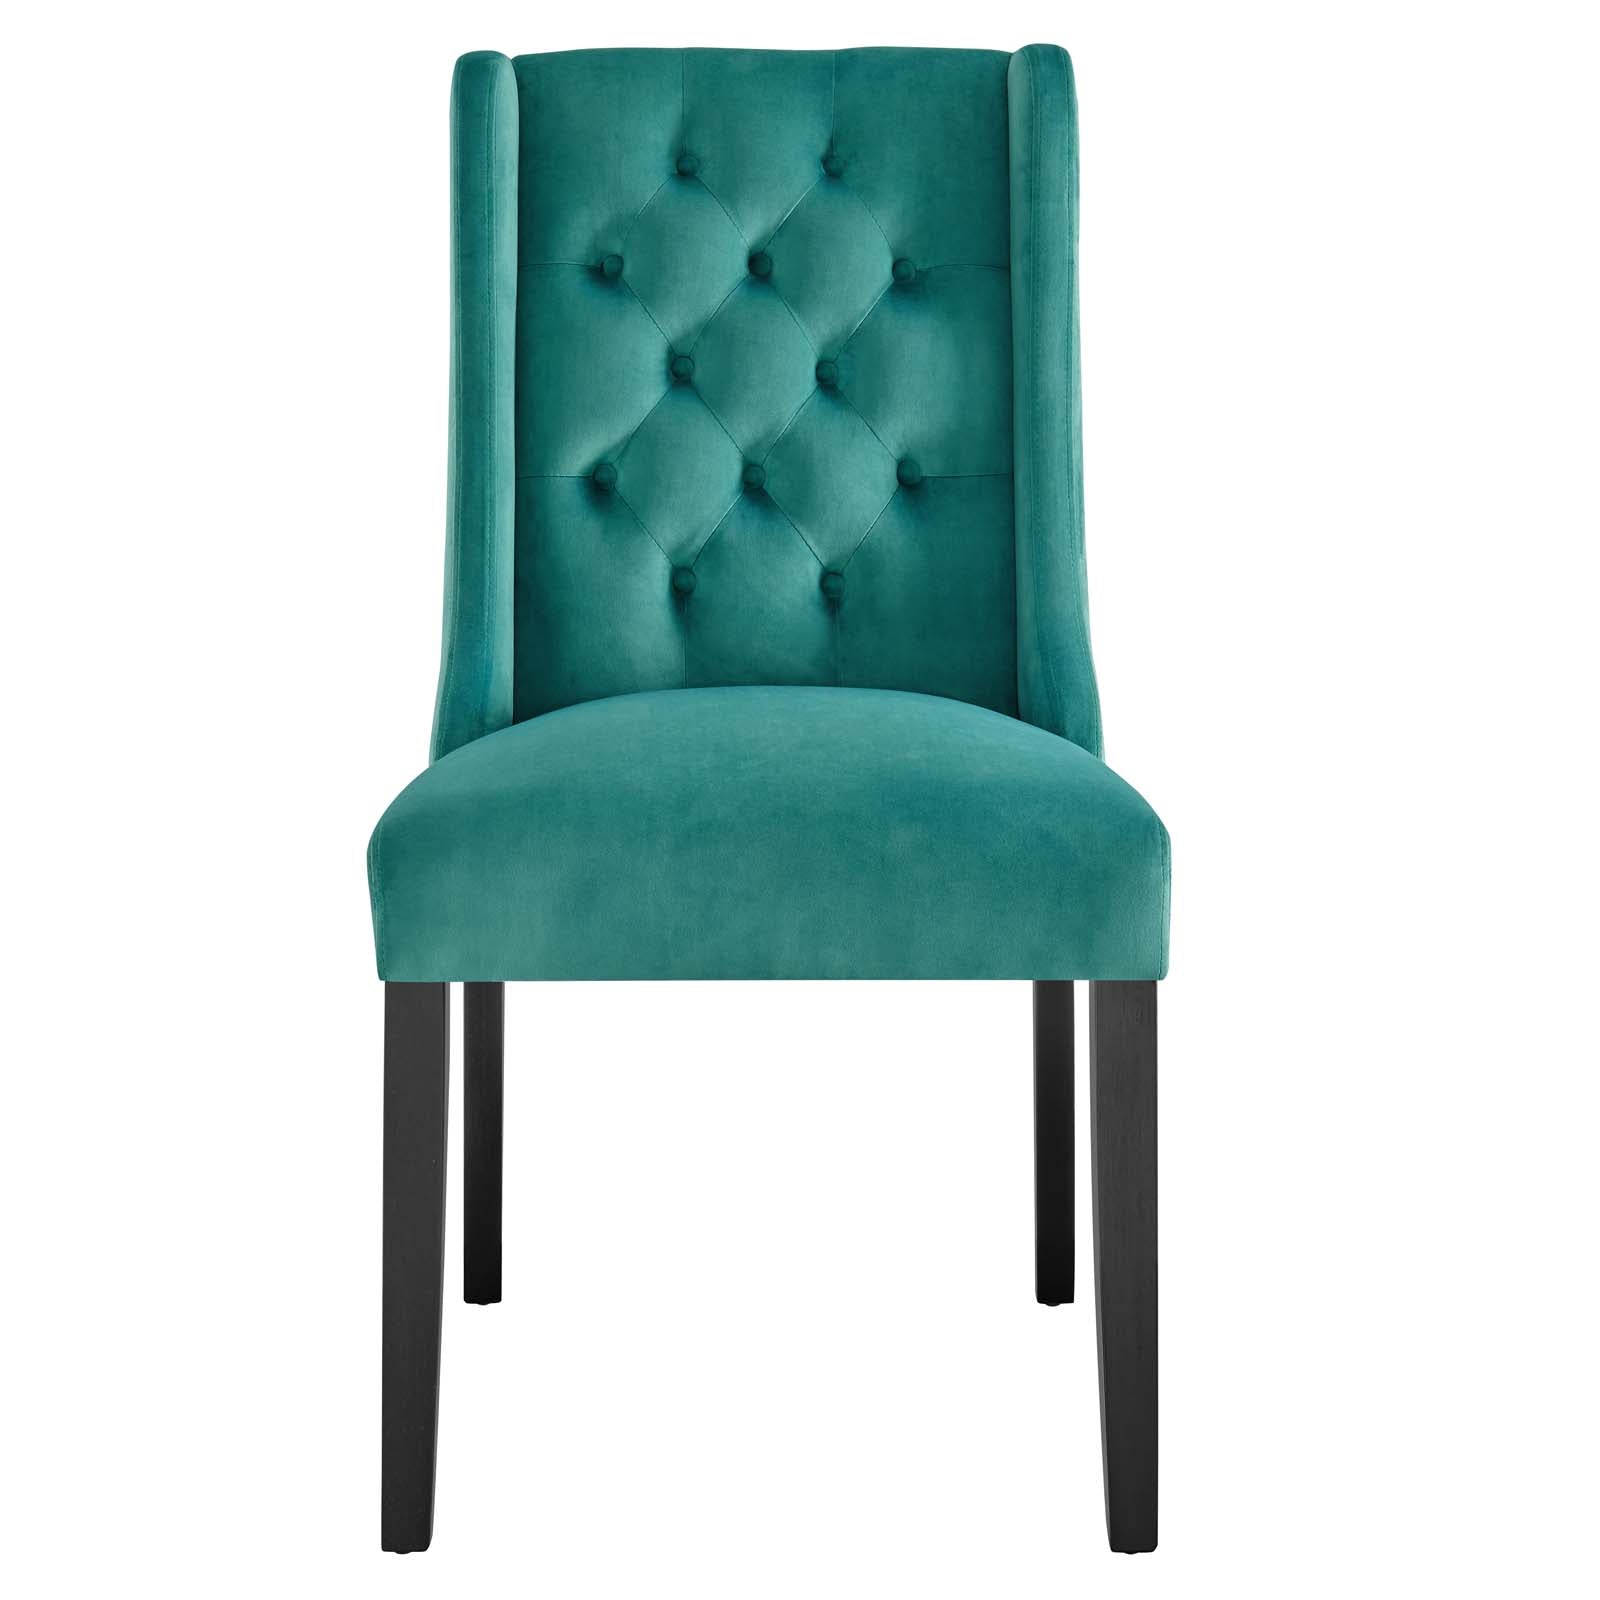 Modway Dining Chairs - Baronet Performance Velvet Dining Chairs - Set of 2 Teal